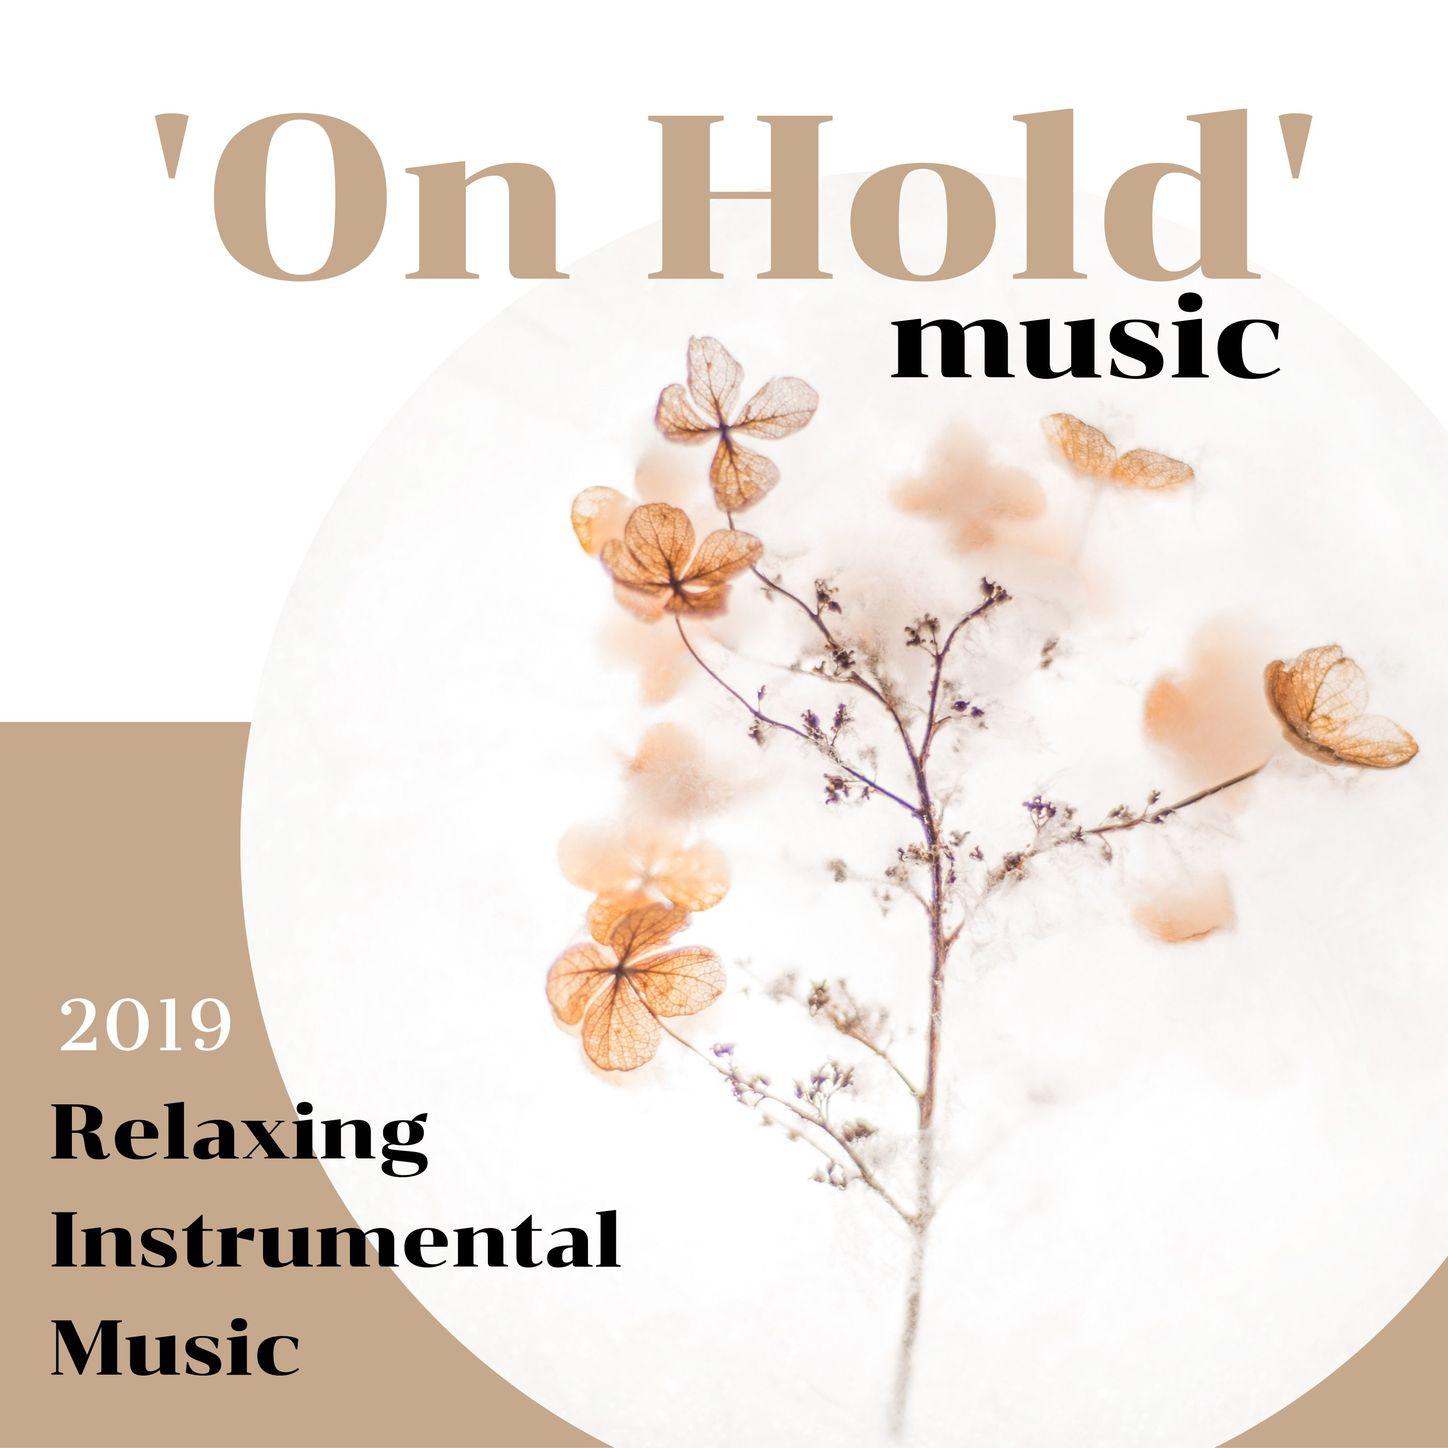 'On Hold' Music 2019 - Relaxing Instrumental Music